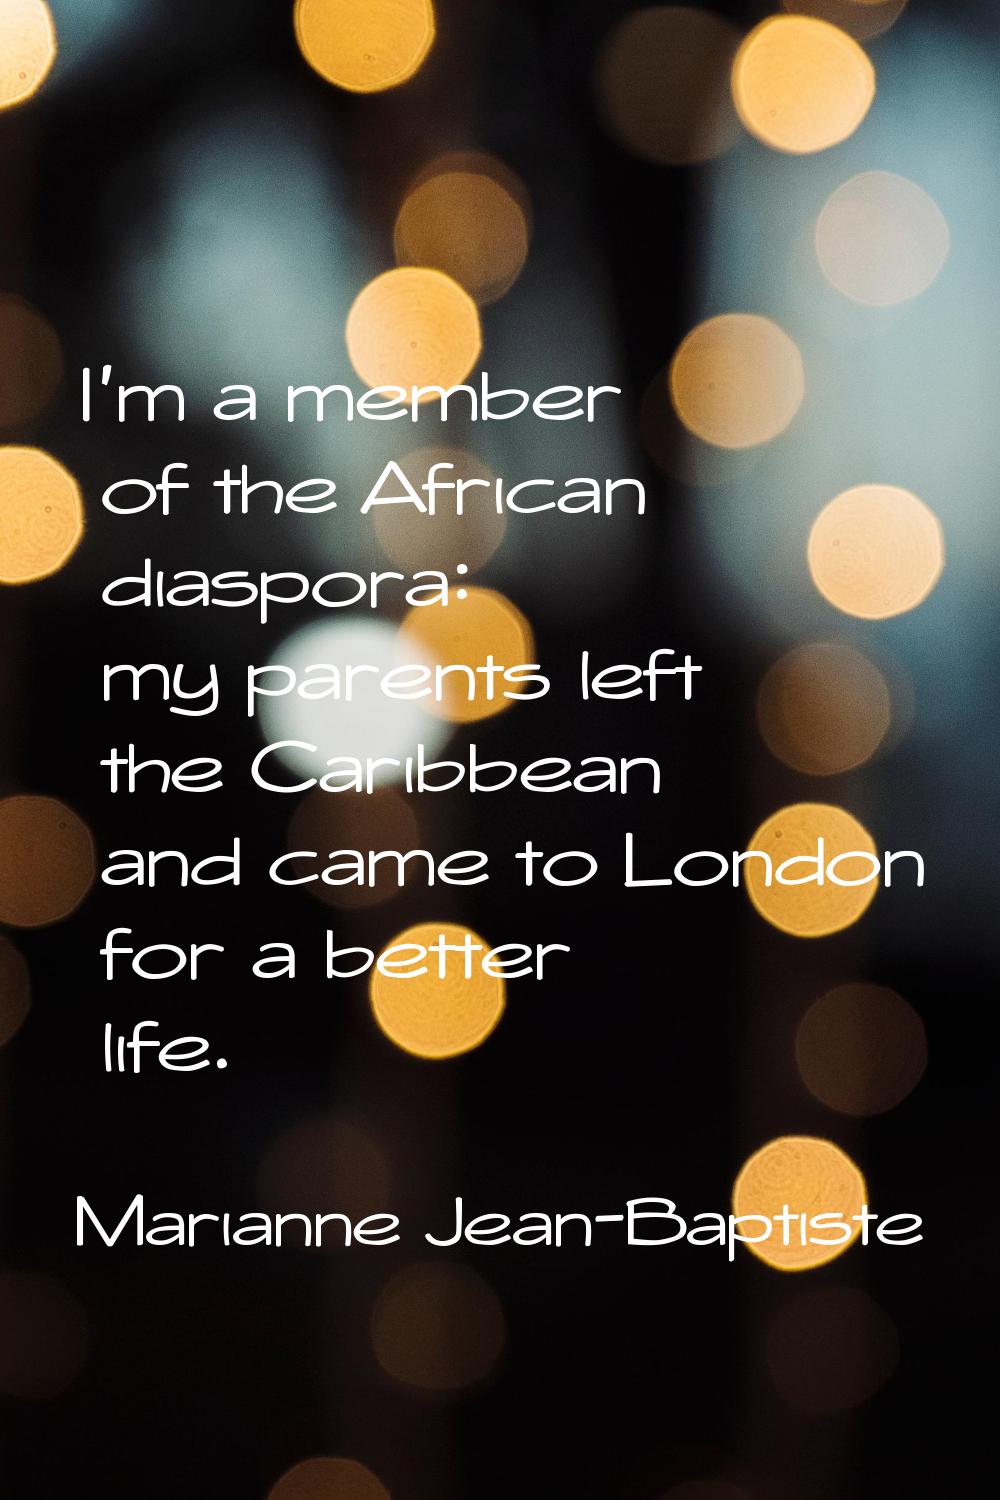 I'm a member of the African diaspora: my parents left the Caribbean and came to London for a better